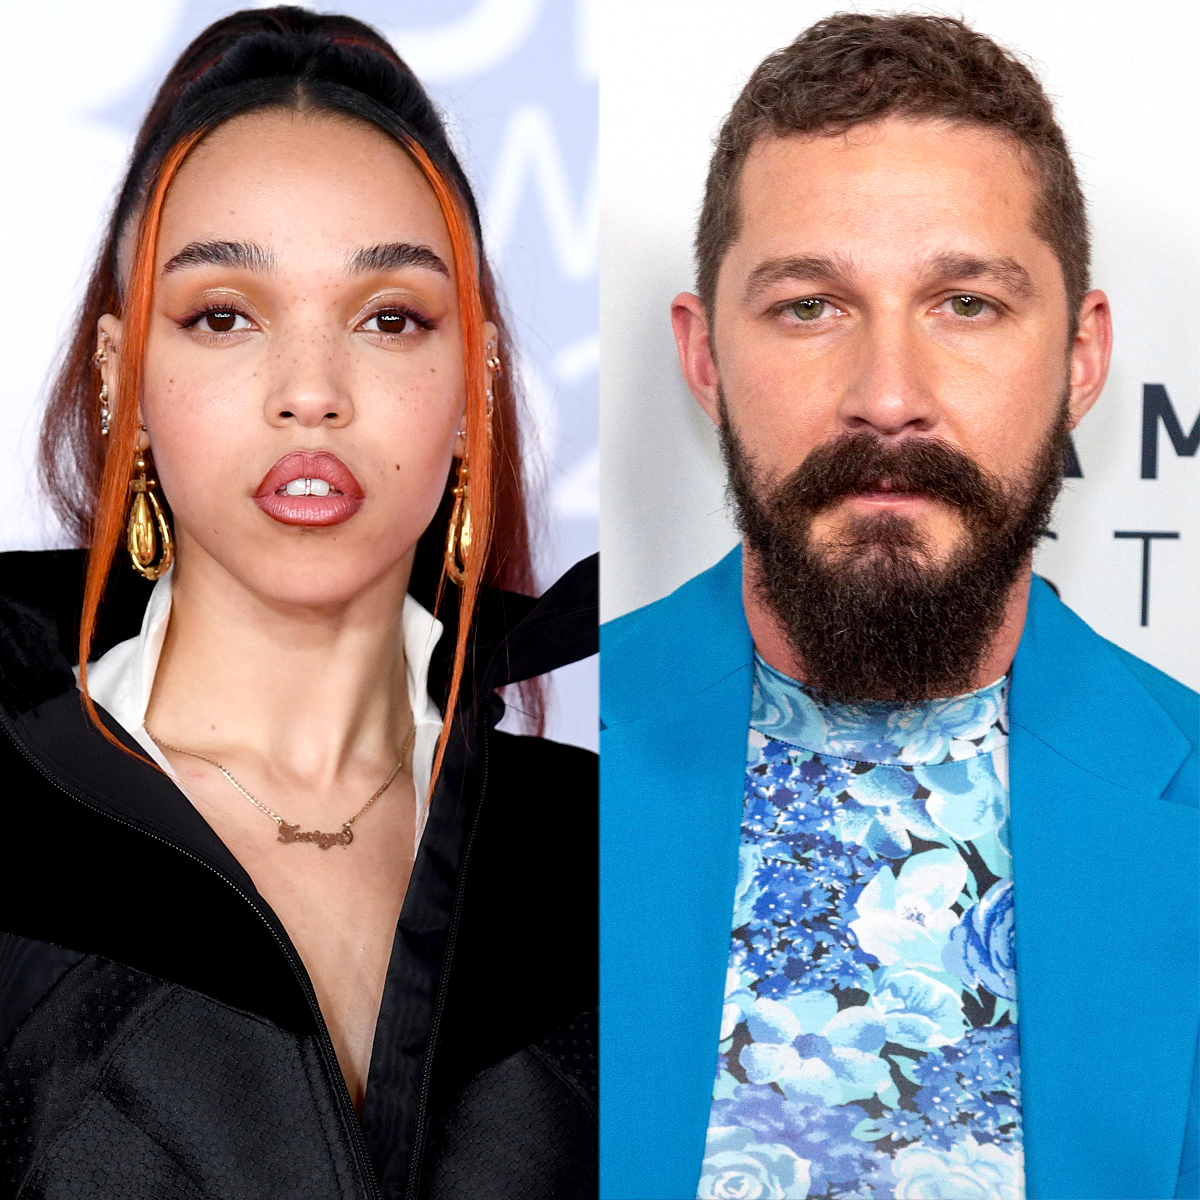 FKA twigs shares the “wake-up call” that led her to leave Shia LaBeouf